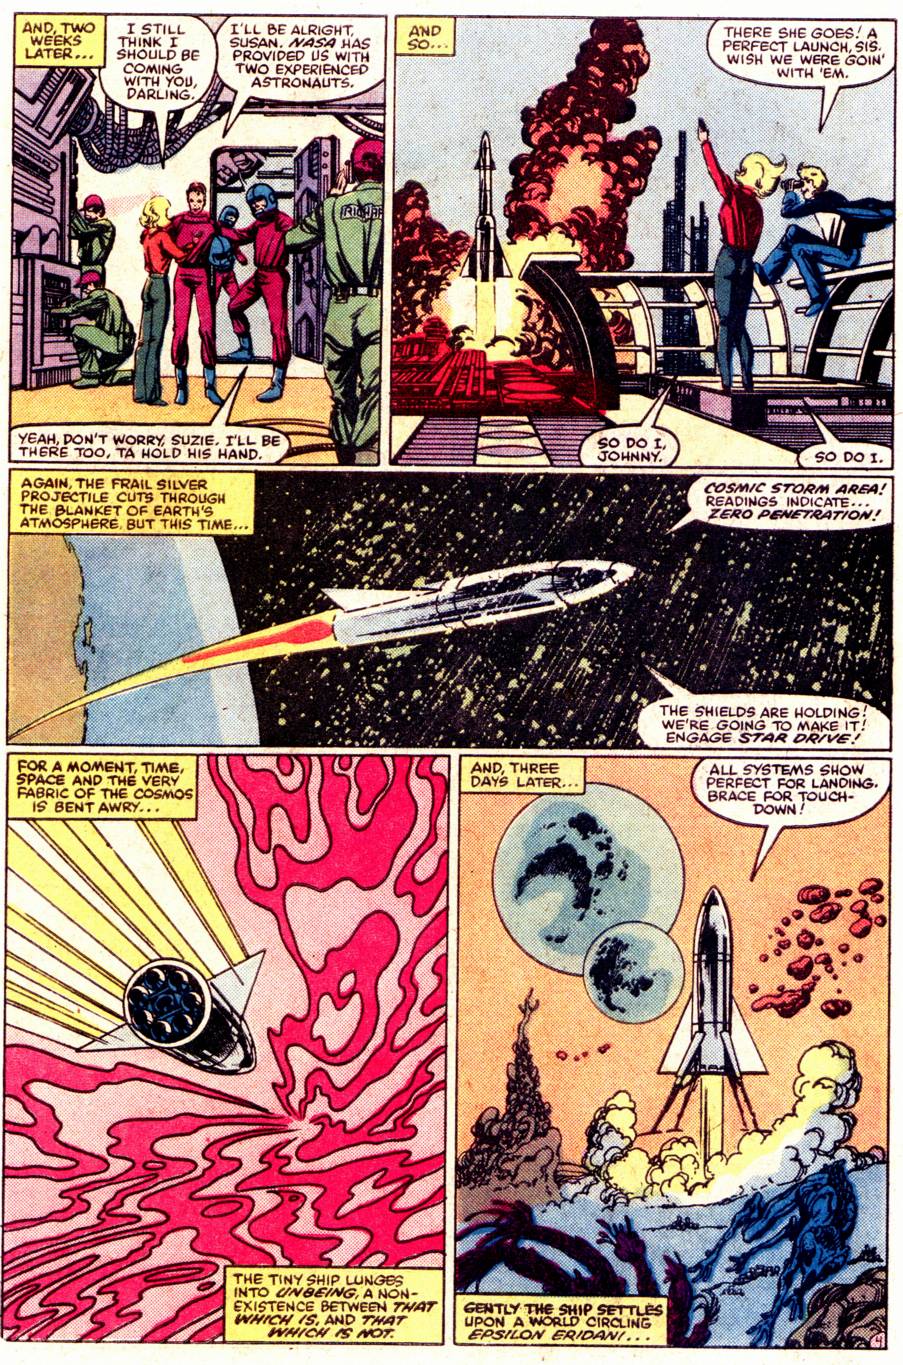 What If? (1977) issue 36 - The Fantastic Four Had Not Gained Their Powers - Page 5